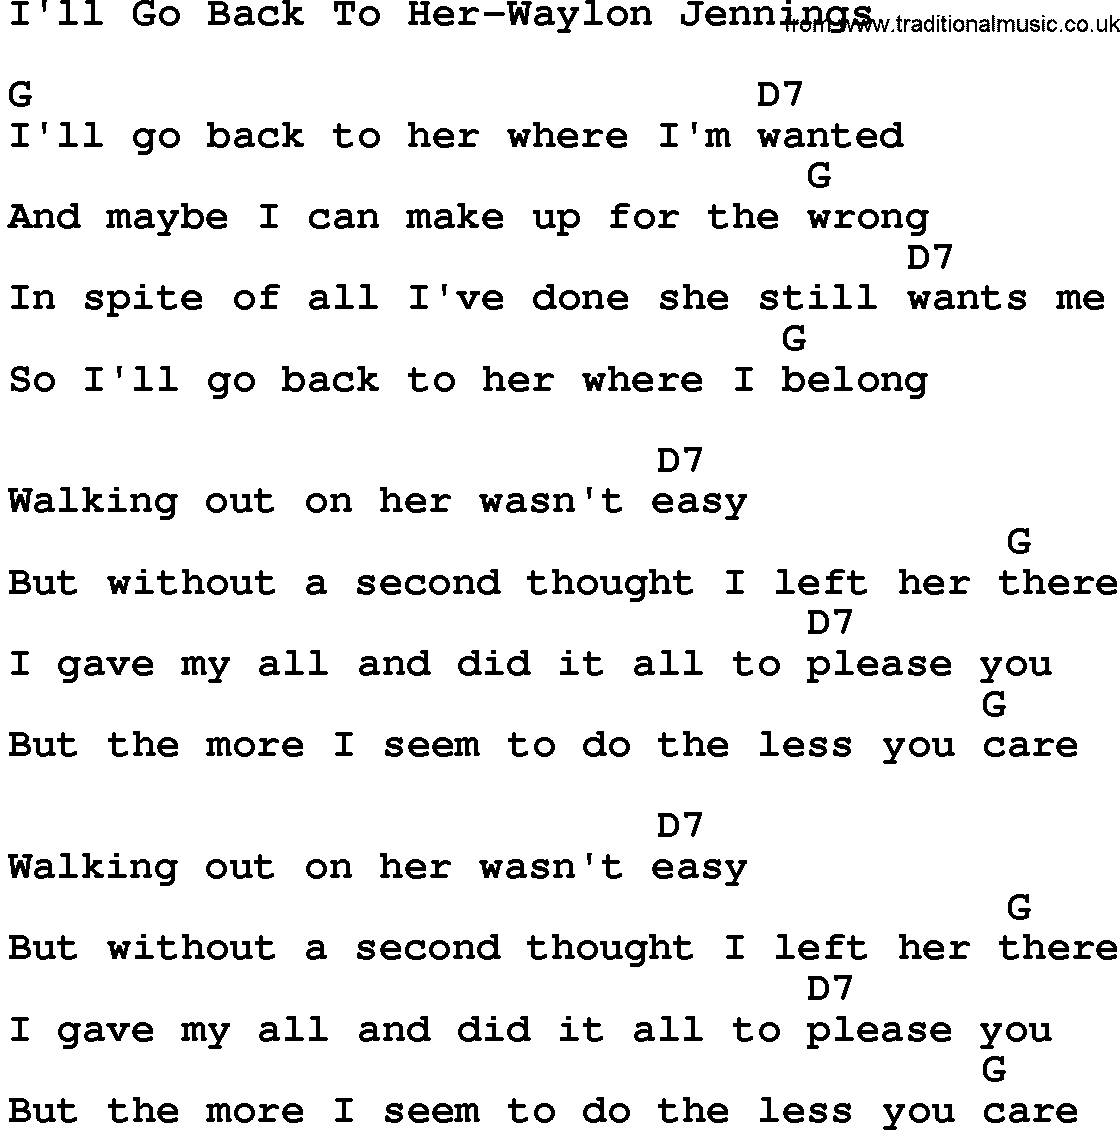 Country music song: I'll Go Back To Her-Waylon Jennings lyrics and chords